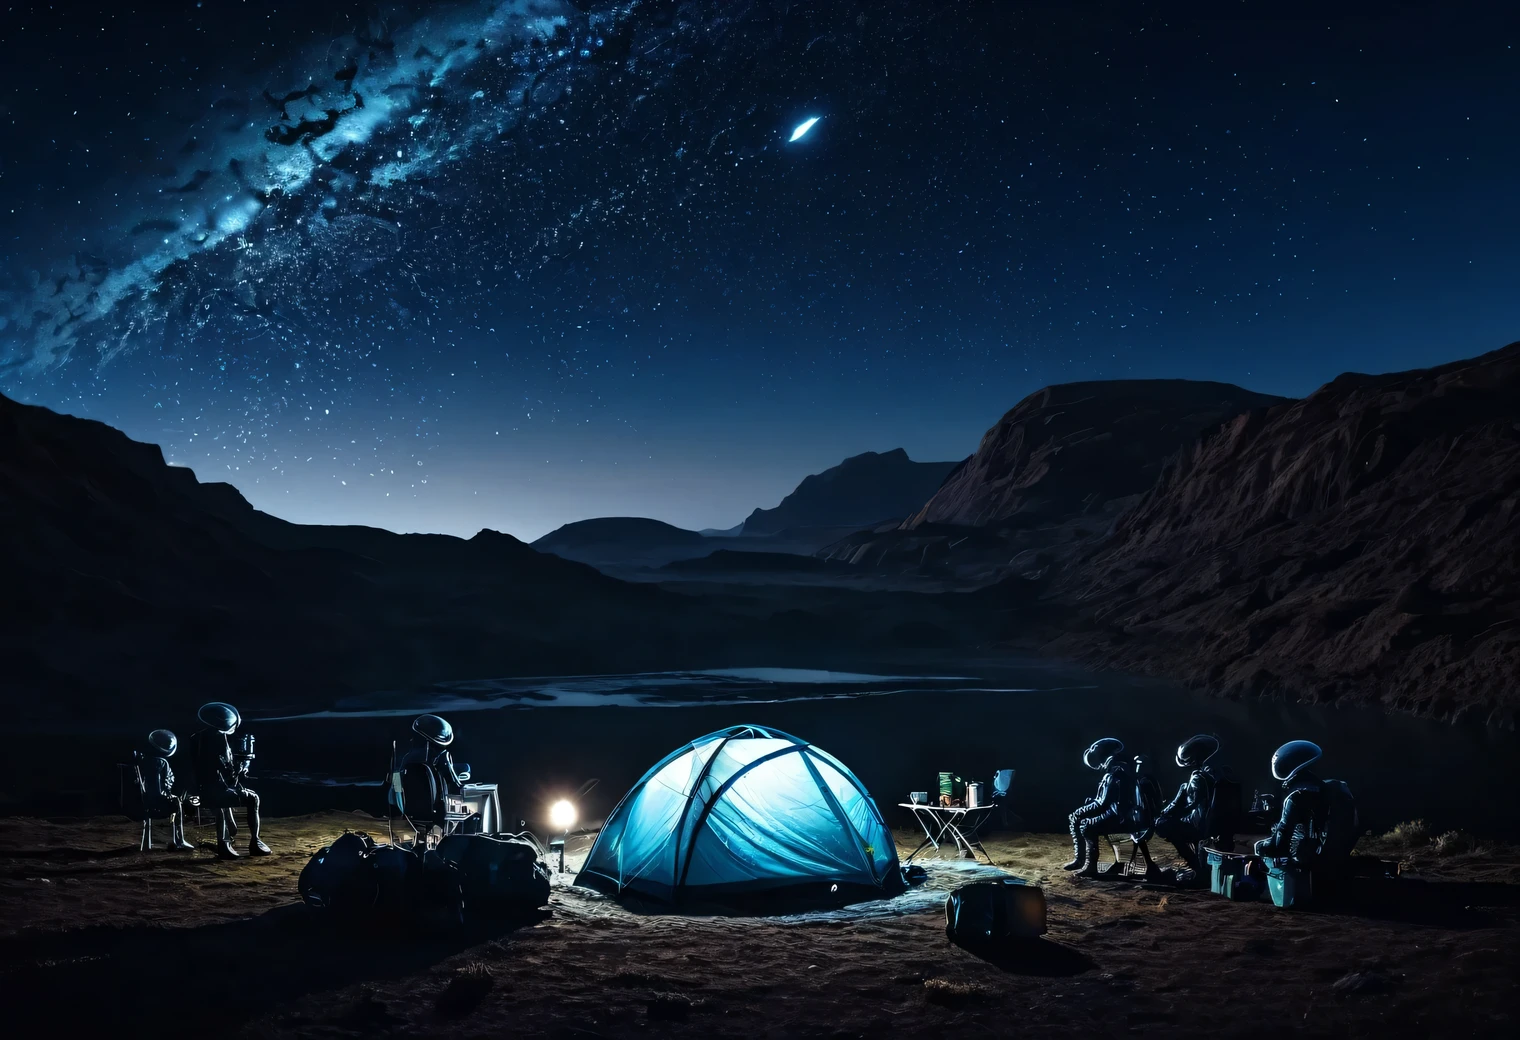 Outdoor Camping, night, alien planet, alien fauna, alien technology, alien planets and unknown constellations in the night sky, fantastic Outdoor Camping on an alien planet, cinematic frame